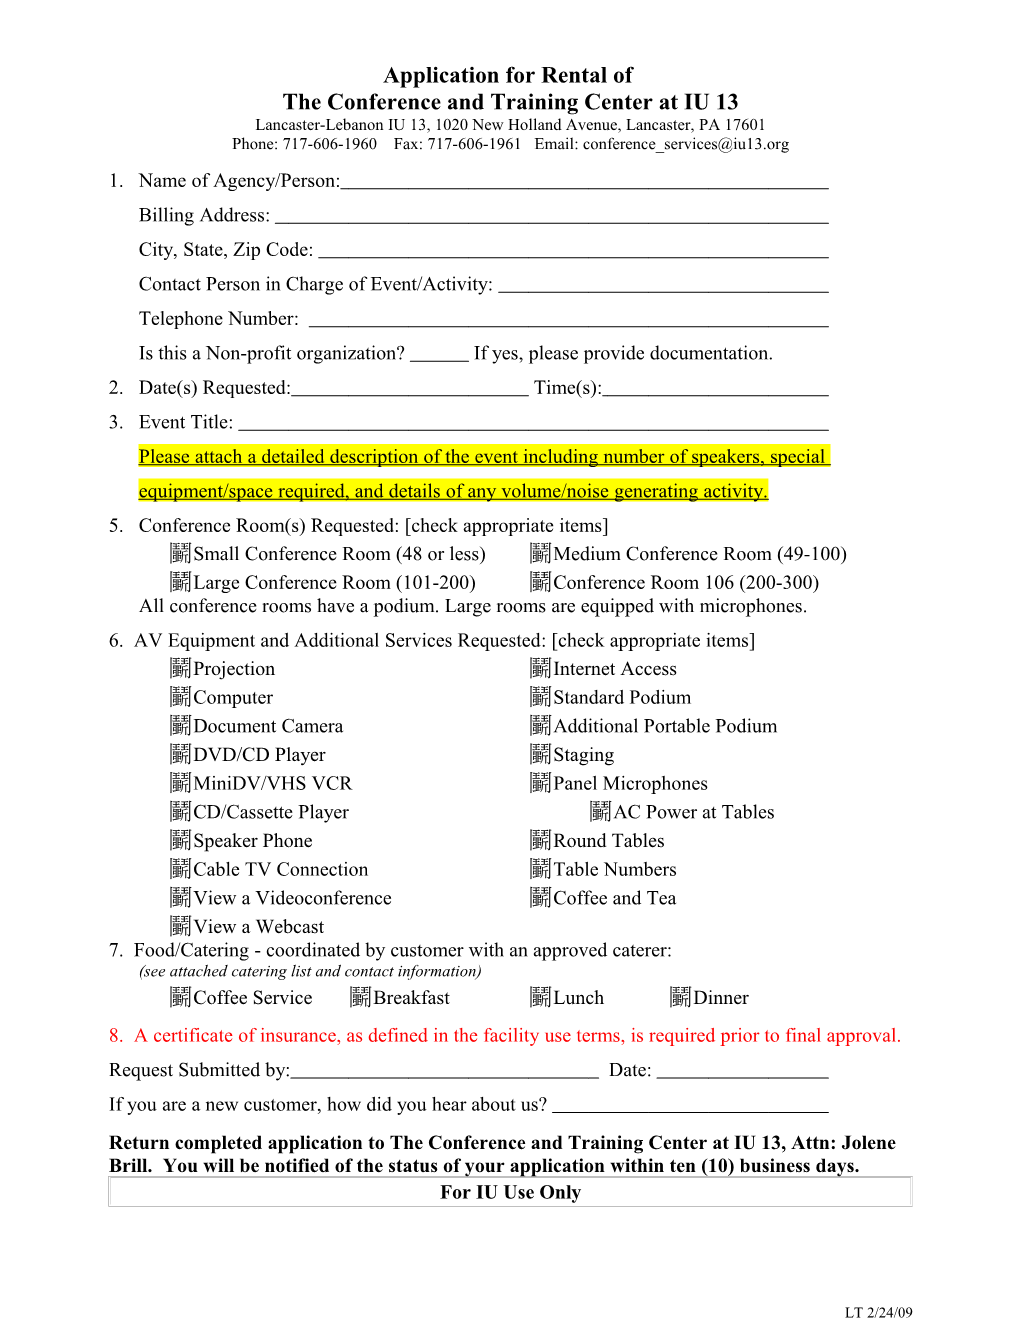 Application for Rental of Lancaster-Lebanon IU 13 Conference Facilities